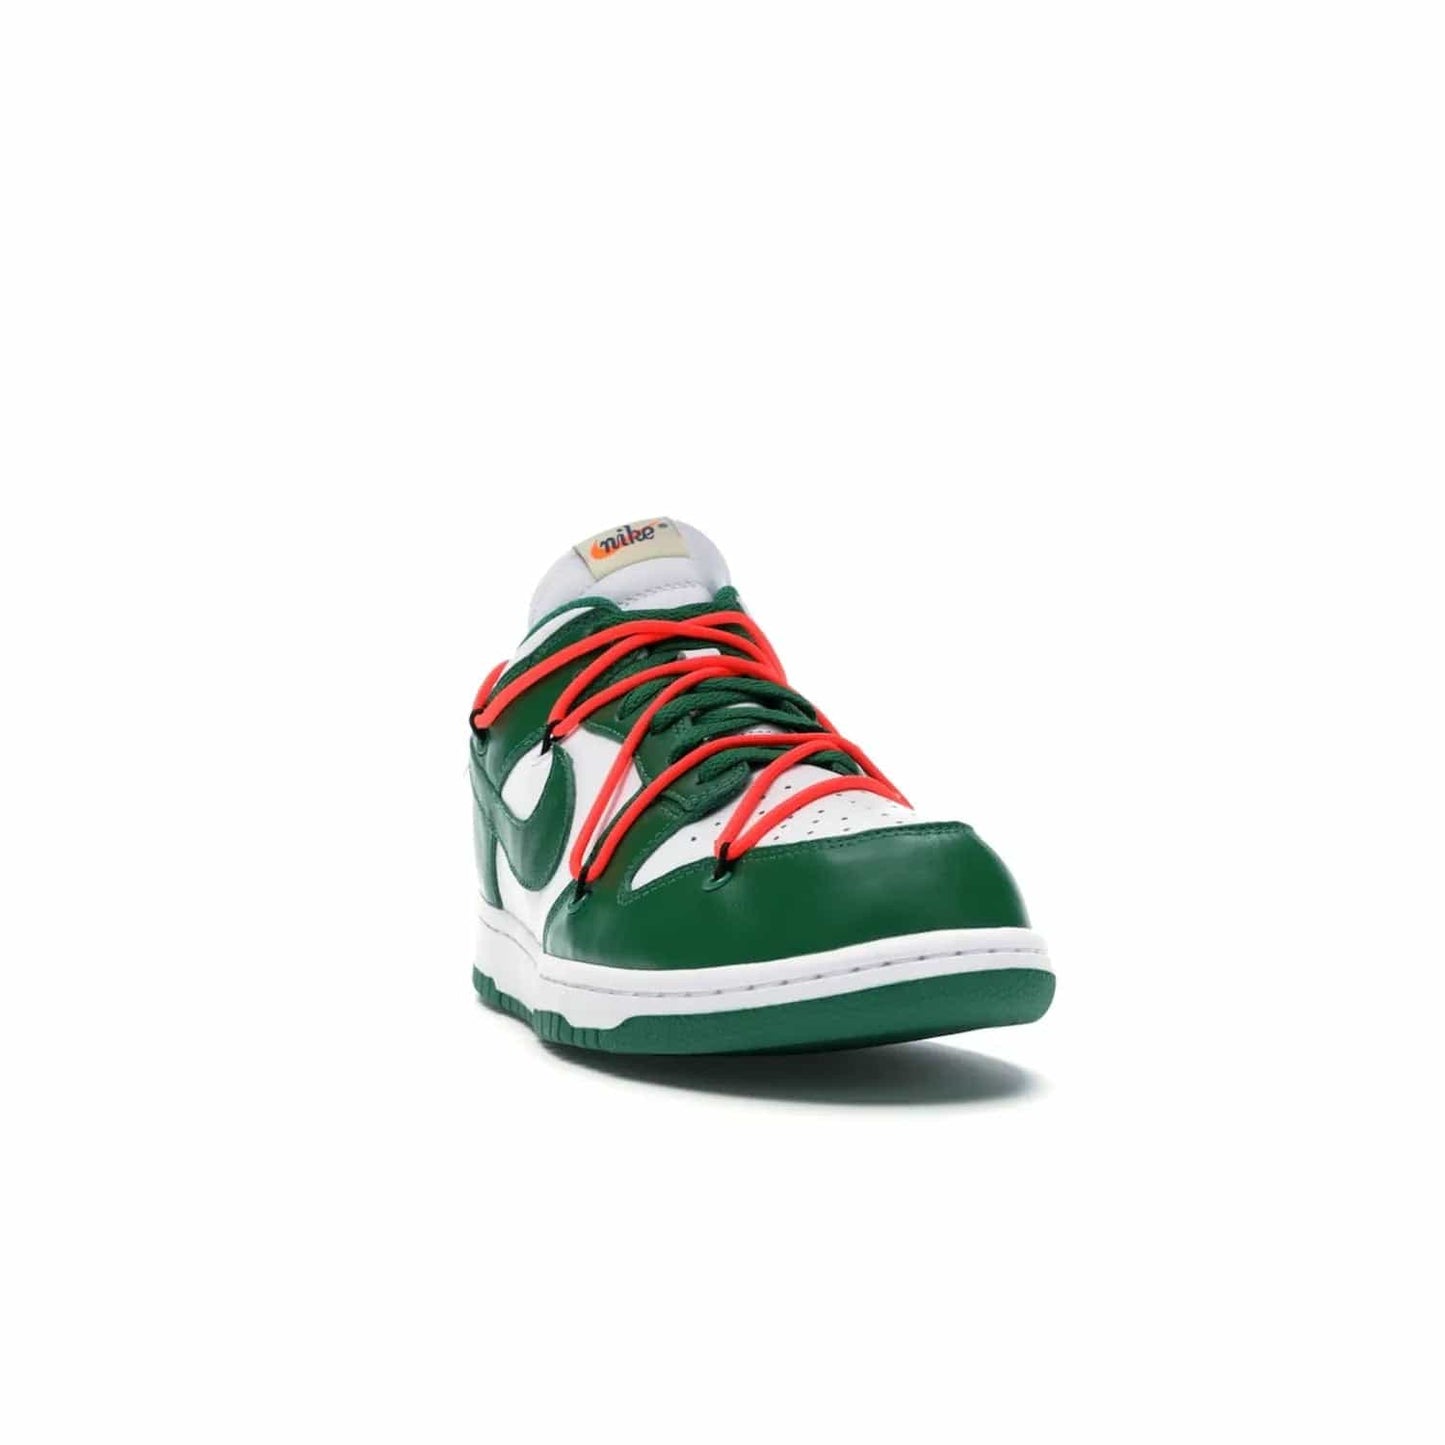 Nike Dunk Low Off-White Pine Green - Image 8 - Only at www.BallersClubKickz.com - The Nike Dunk Low Off-White Pine Green combines classic 1980s style with modern-day design. Featuring white leather uppers and pine green overlays, these classic kicks feature secondary lacing system, zip-ties and signature Off-White text. Releasing in December 2019, these shoes are a timeless classic for any wardrobe.